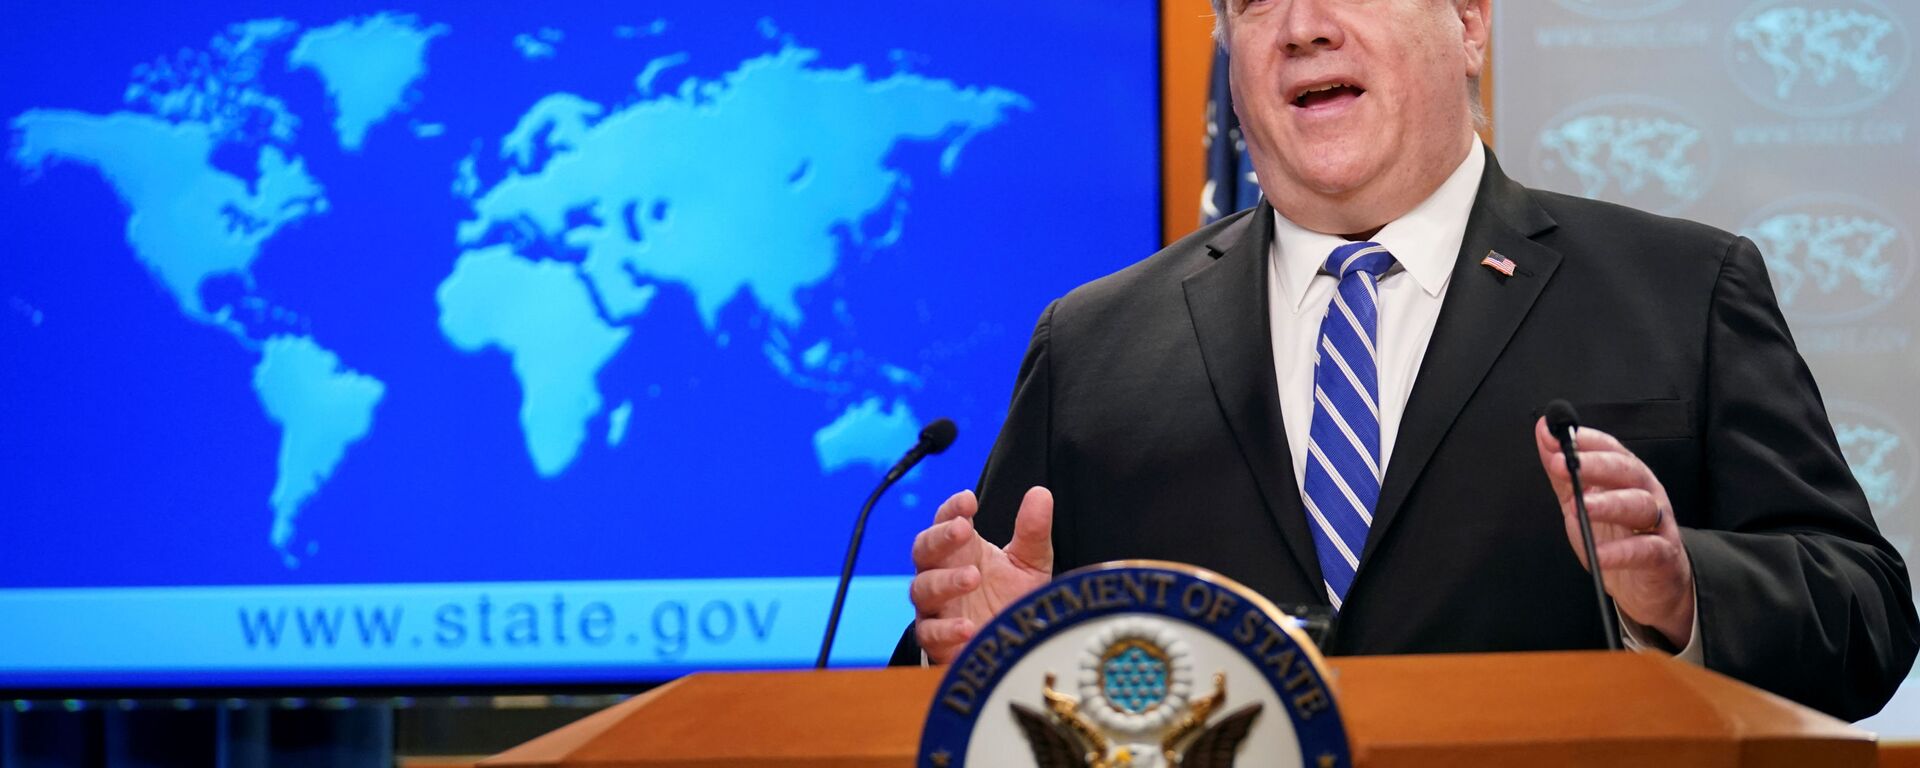 U.S. Secretary of State Mike Pompeo speaks about the coronavirus disease (COVID-19) during a media briefing at the State Department in Washington, U.S., May 6, 2020 - Sputnik International, 1920, 02.06.2020